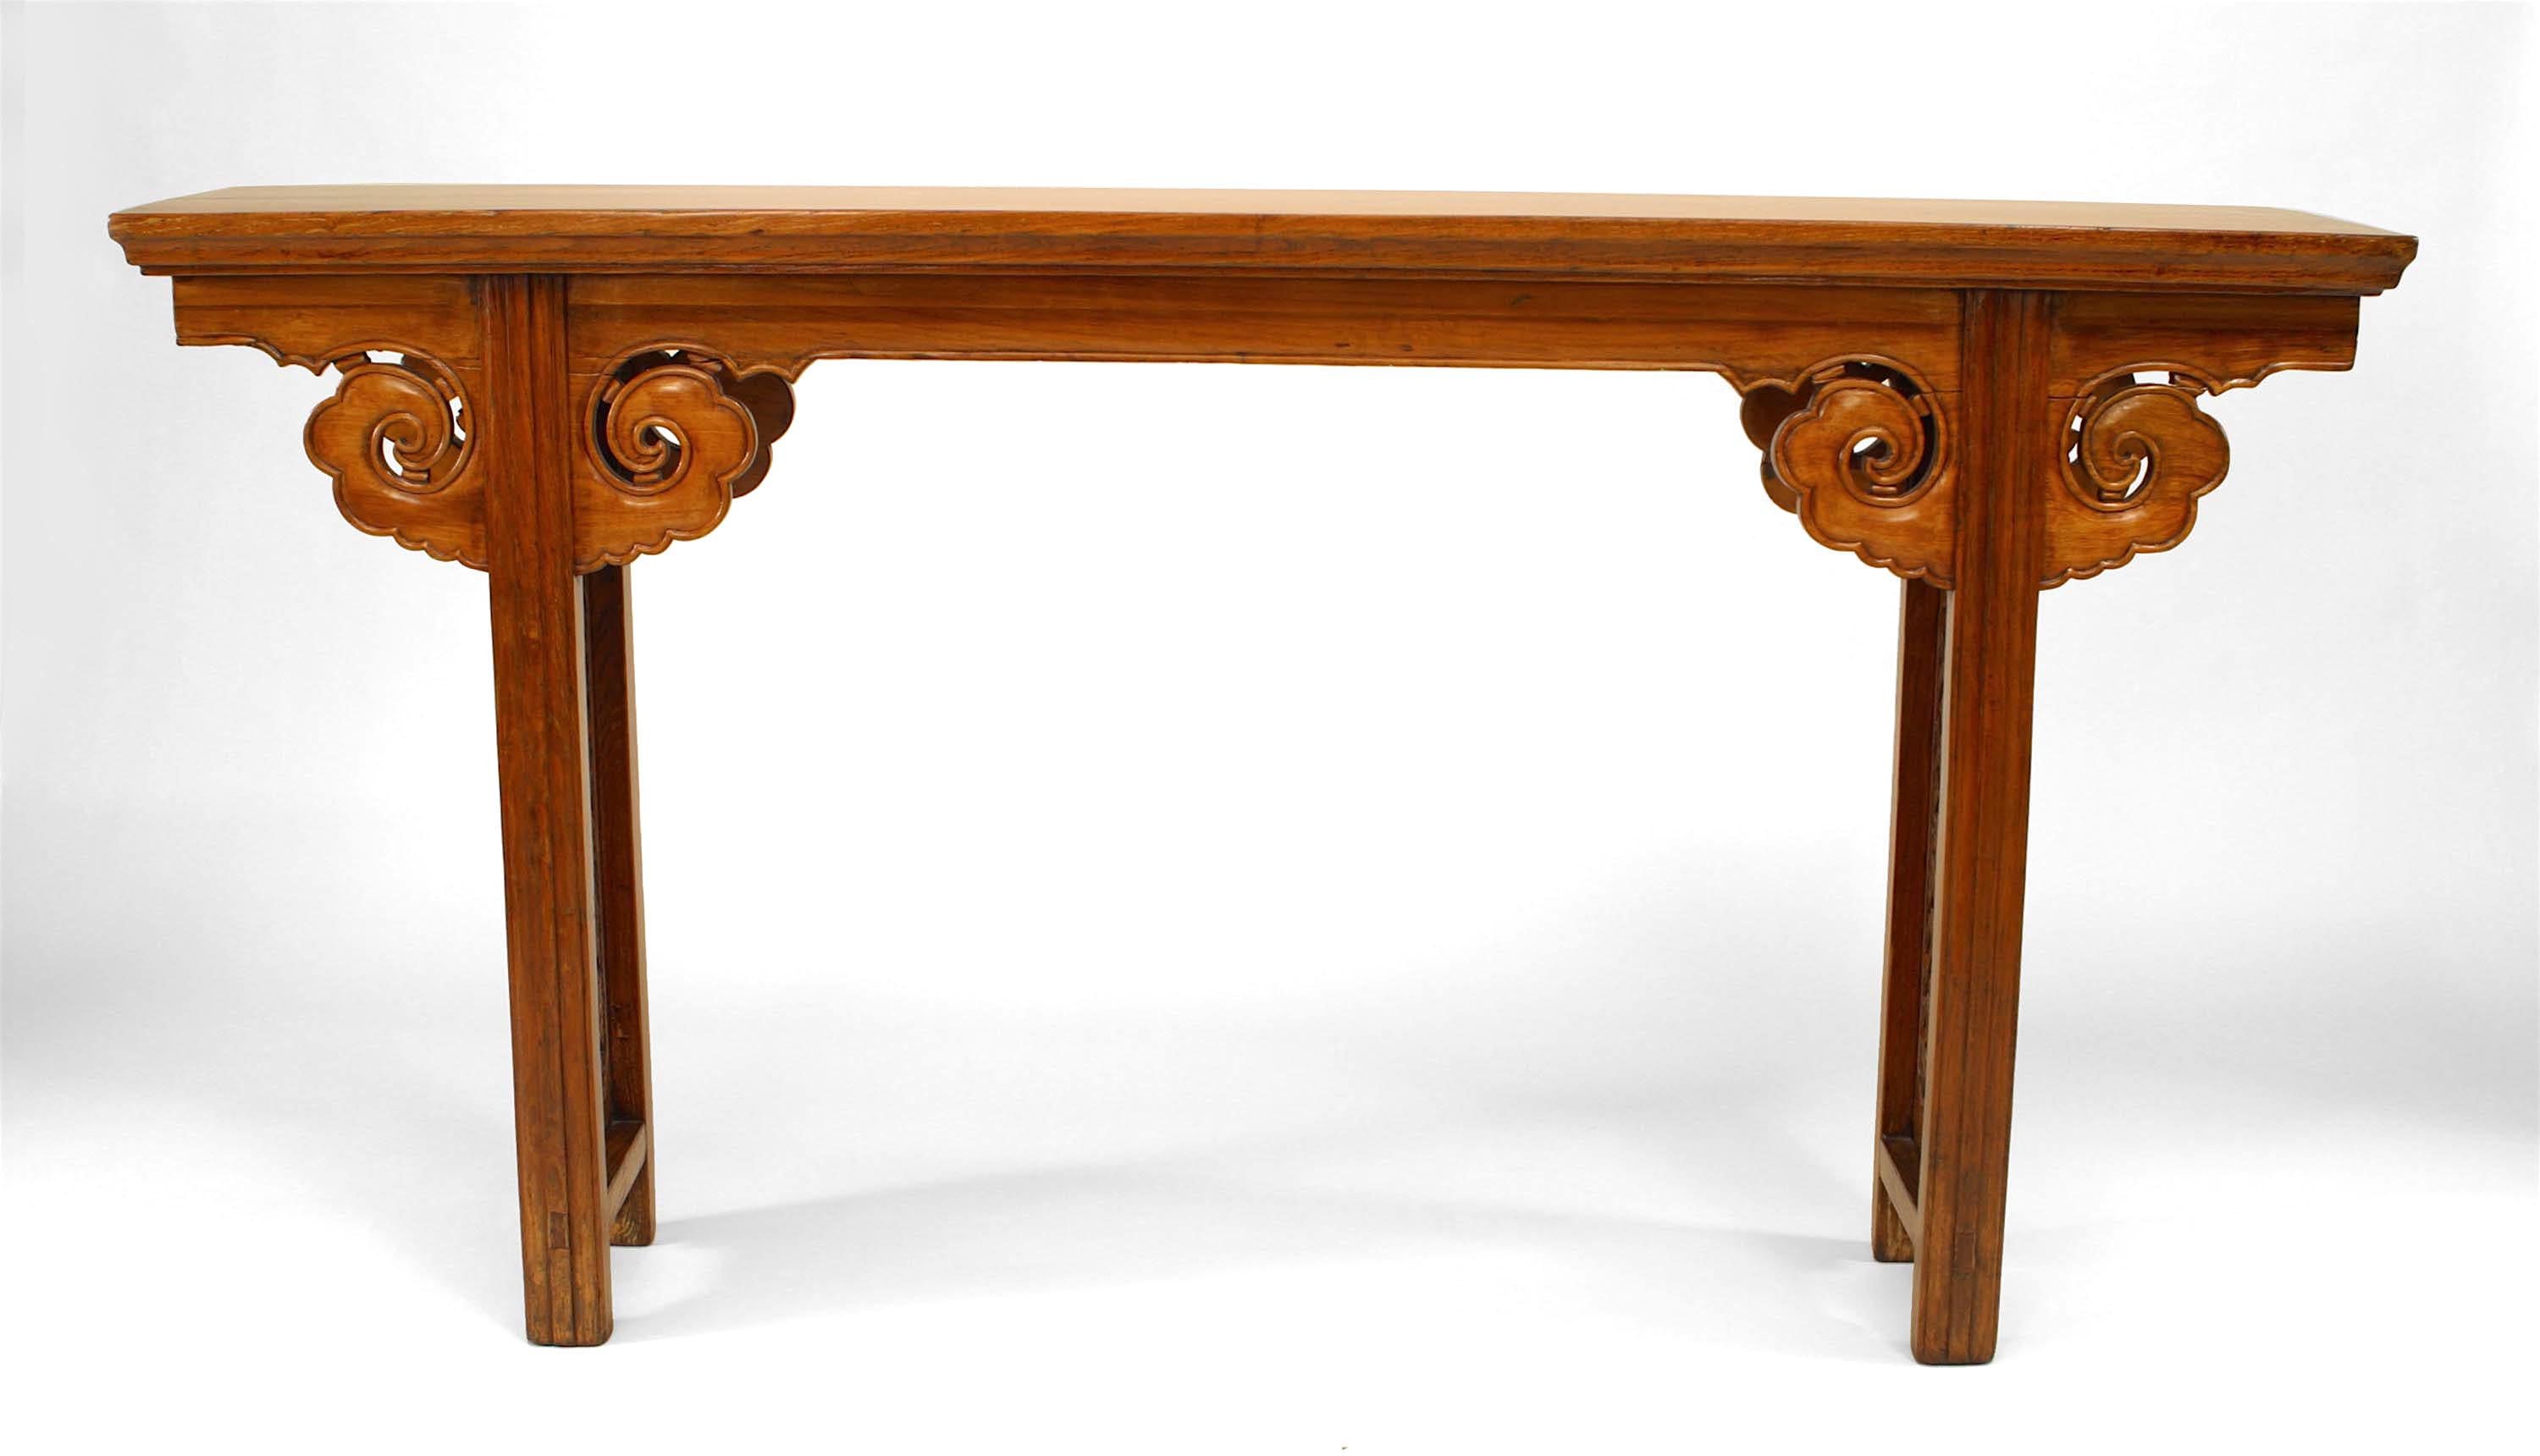 tables have intricately carved edges